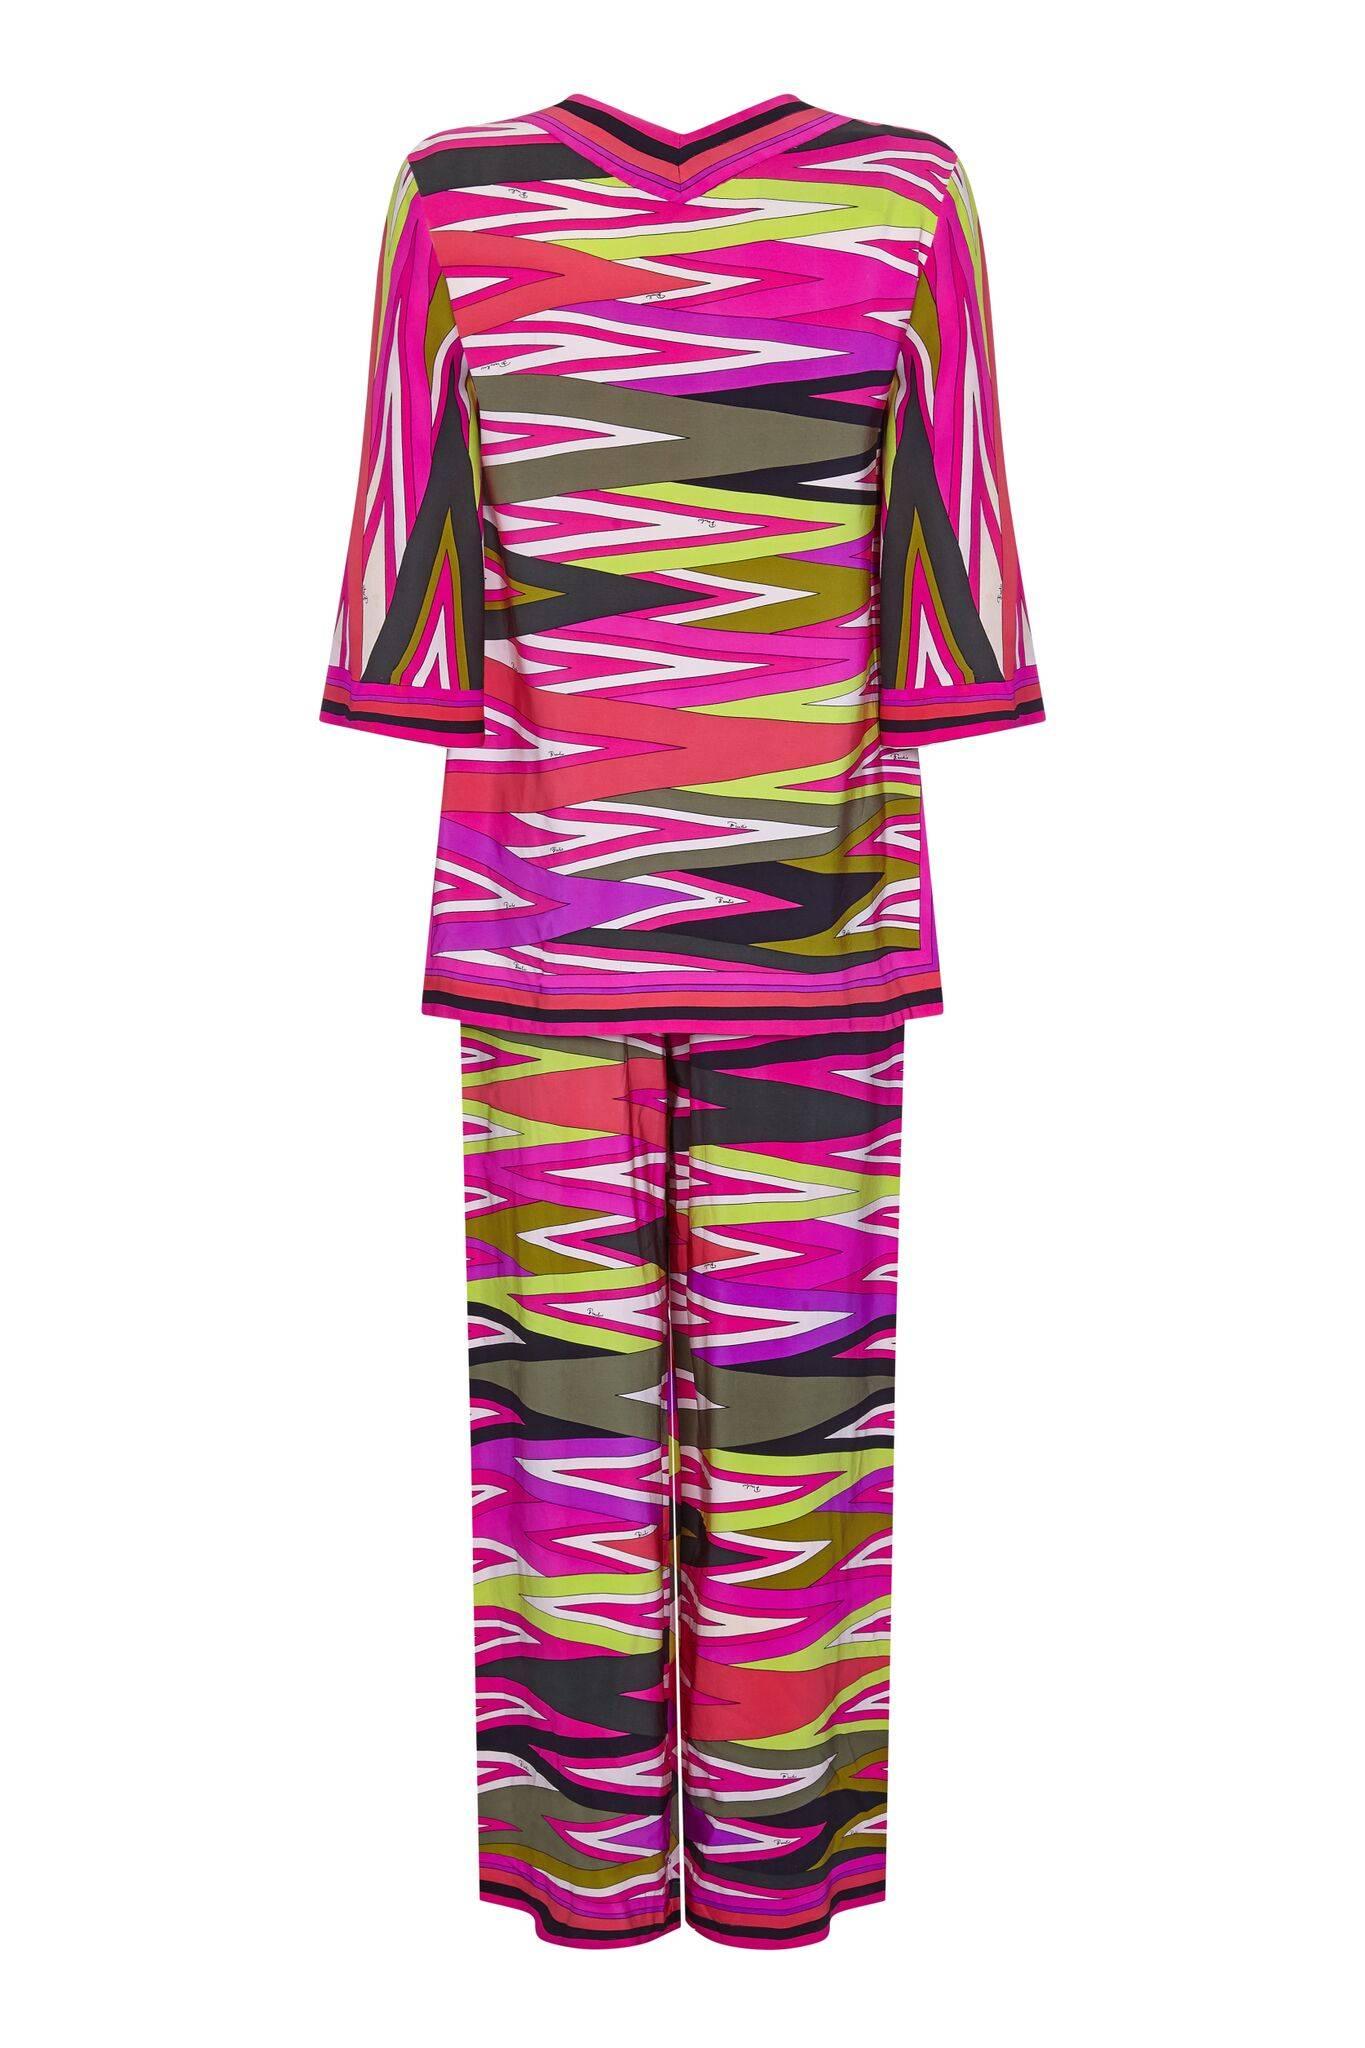 This fabulous and rare late 1960s or early 1970s Emilio Pucci silk trouser set is a fine example of this designer's celebrated signature style. A statement status brand throughout the 1960s, Pucci was synonymous with casual 'at-home' wear in bold